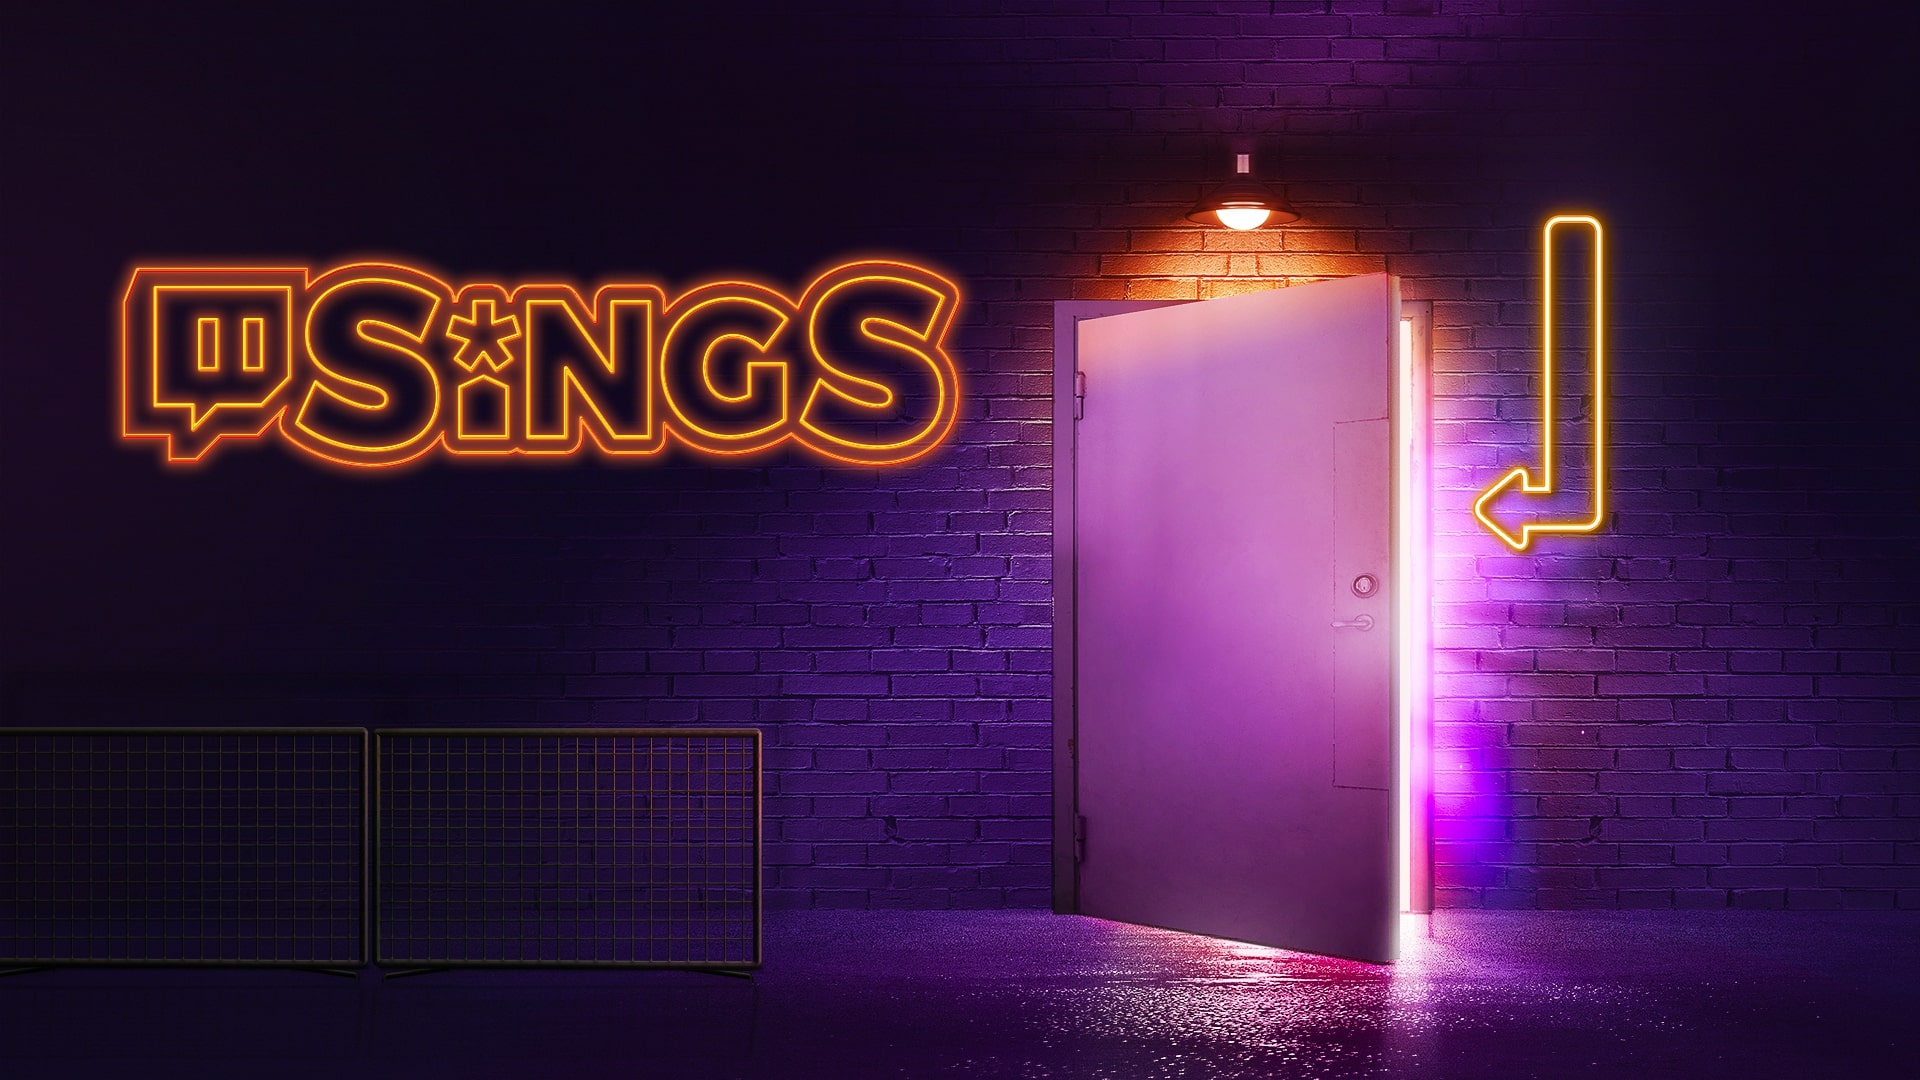 Twitch launches their own karaoke videogame called 'Twitch Sings'